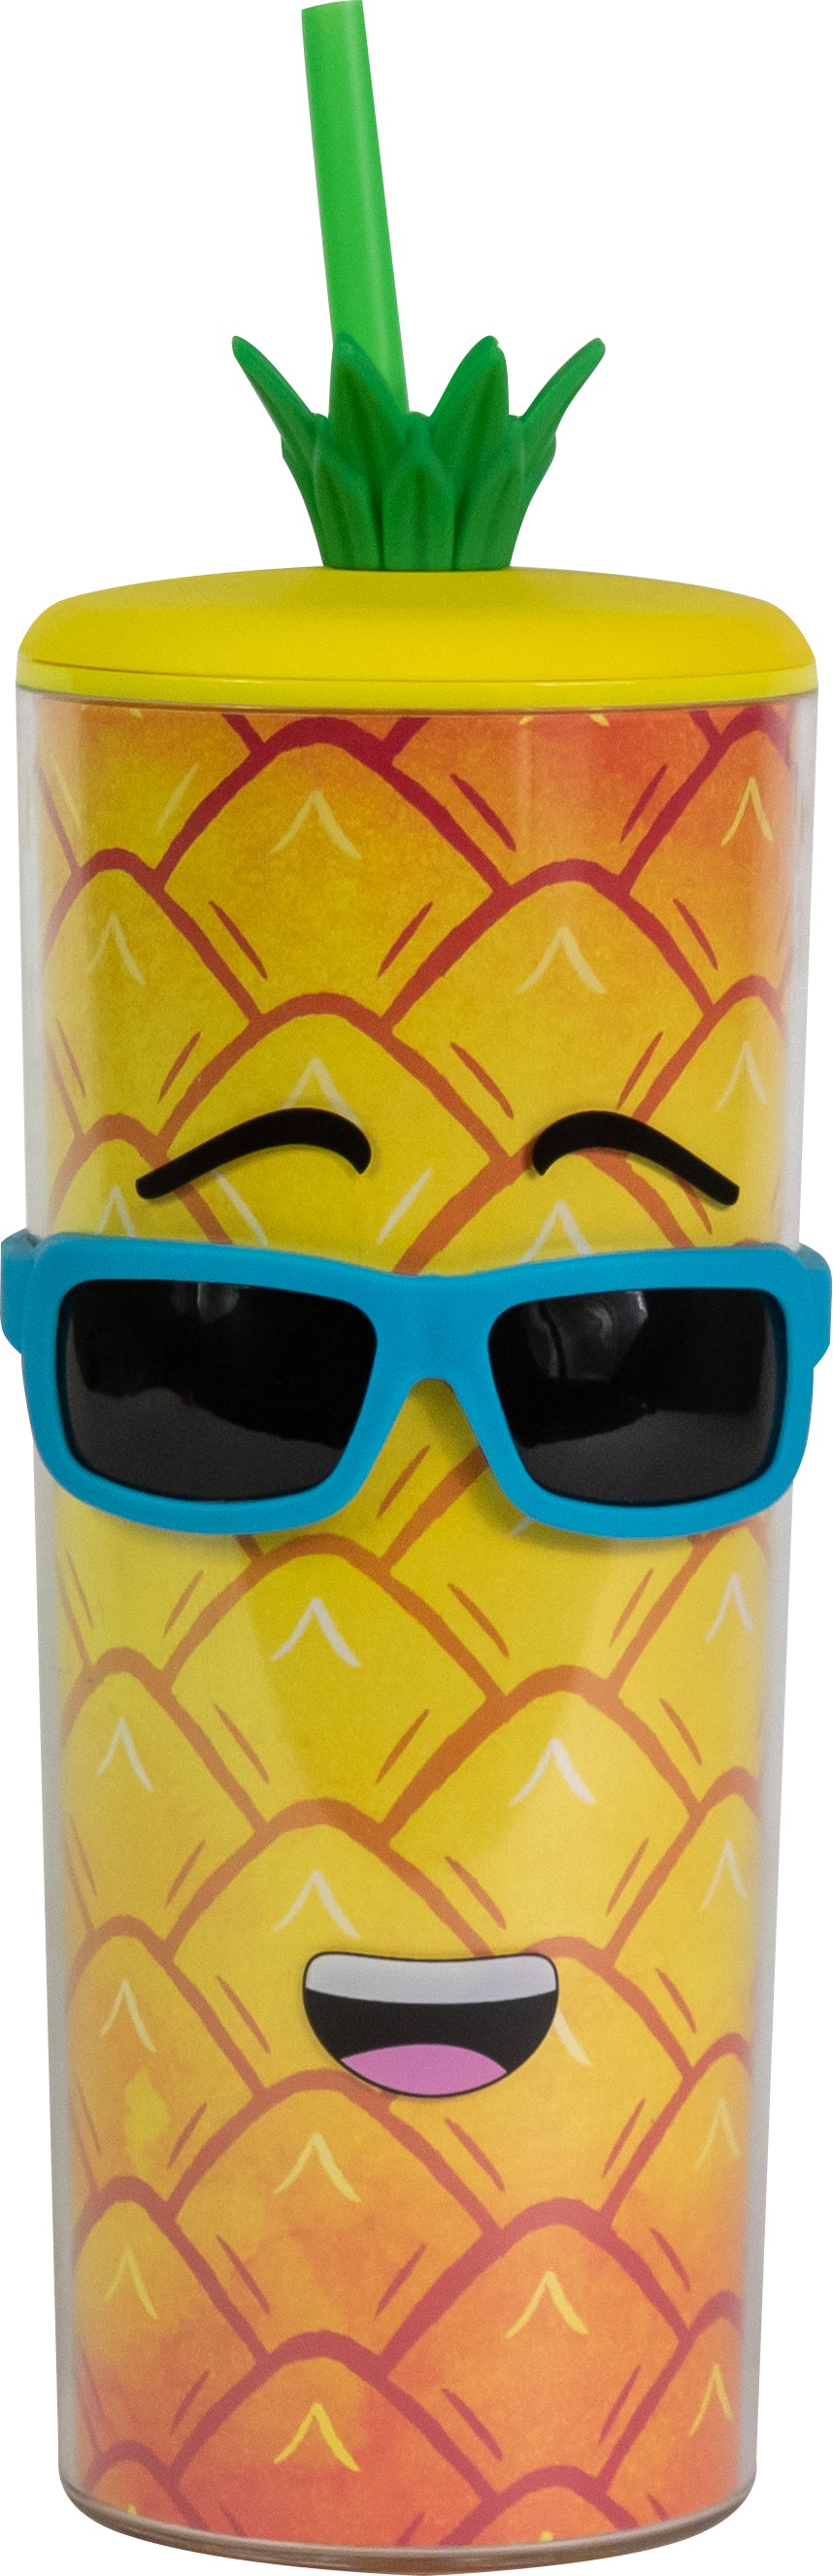 Cool Gear Shady Fruit Tumbler with Pressure Fit Lid and Straw Included, 20 Ounce - image 3 of 3